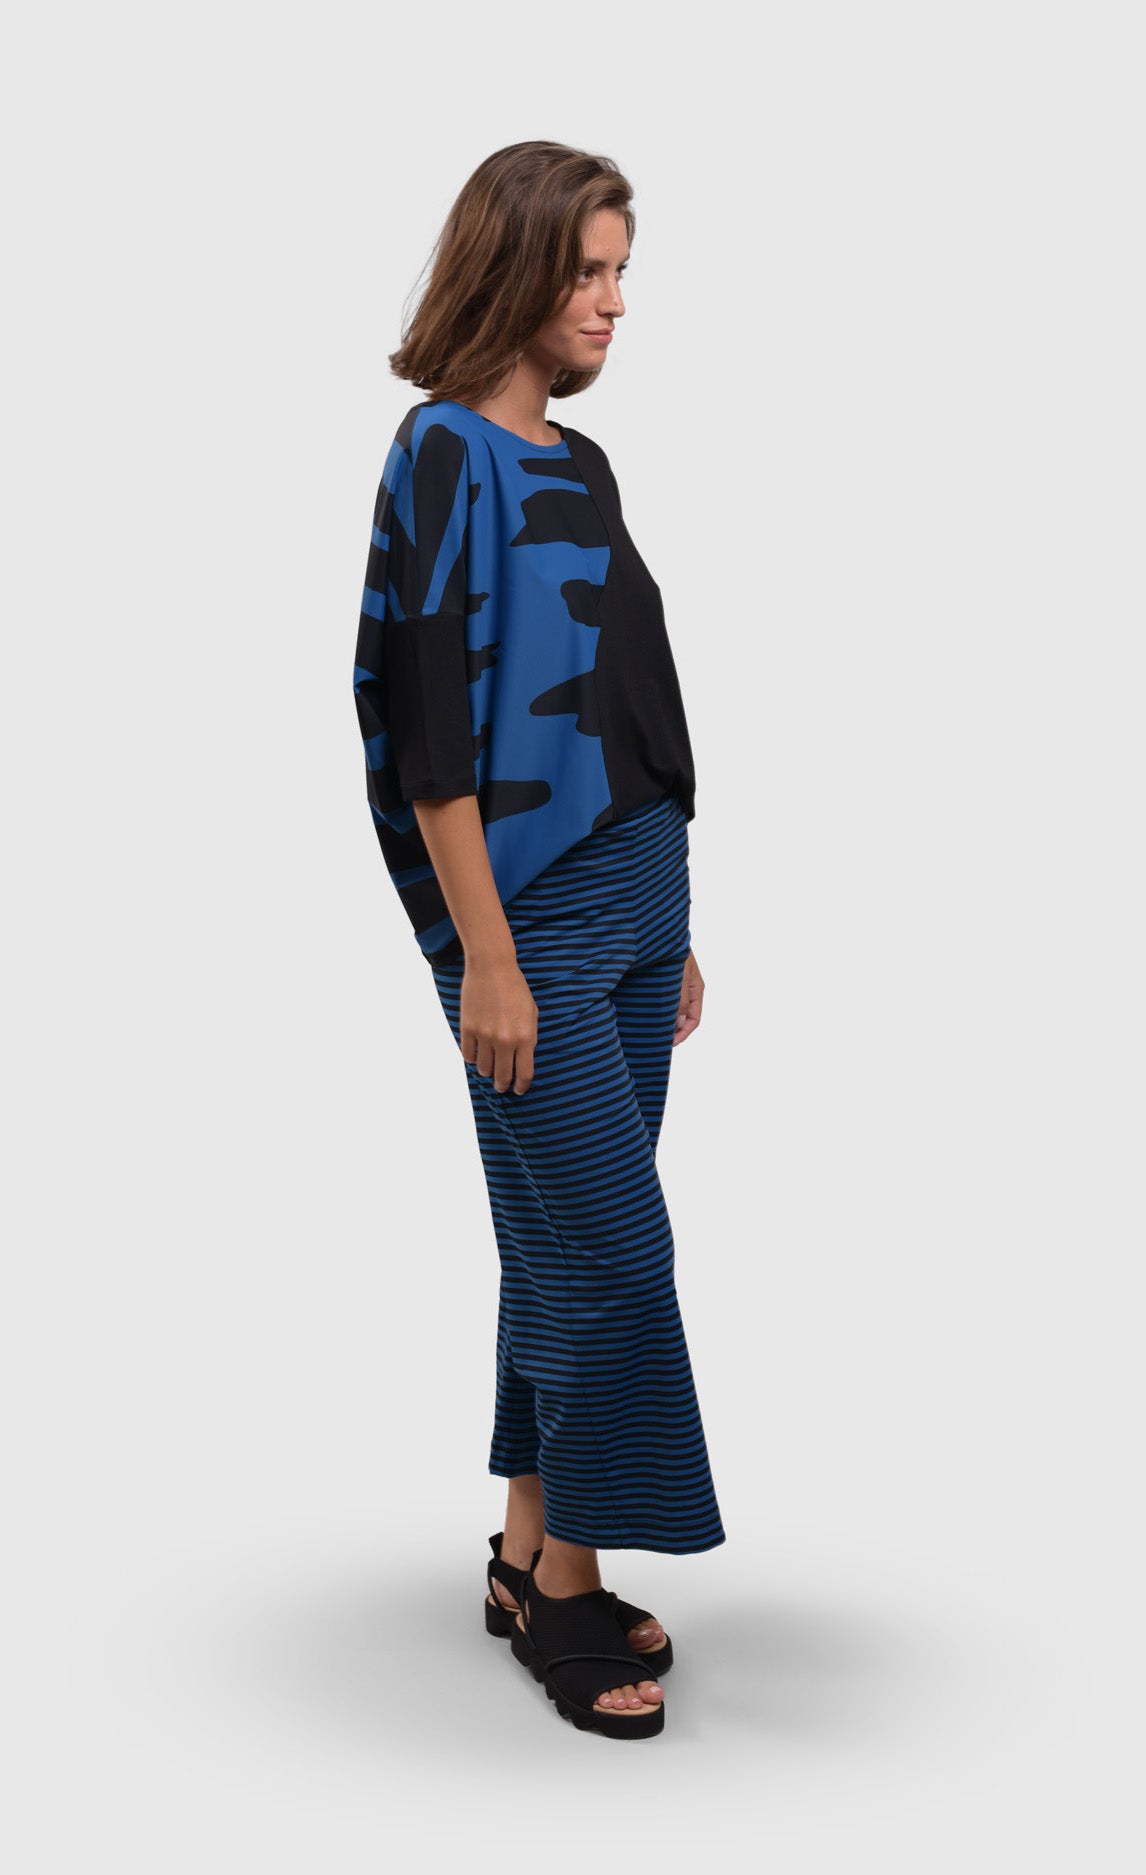 Front right side full body view of a woman wearing blue and black striped pants and the alembika tekbika ocean wave top. This top is black with a right sides wave paneling design in blue. The top as a scoop neck and drop shoulder, 3/4 length sleeves.